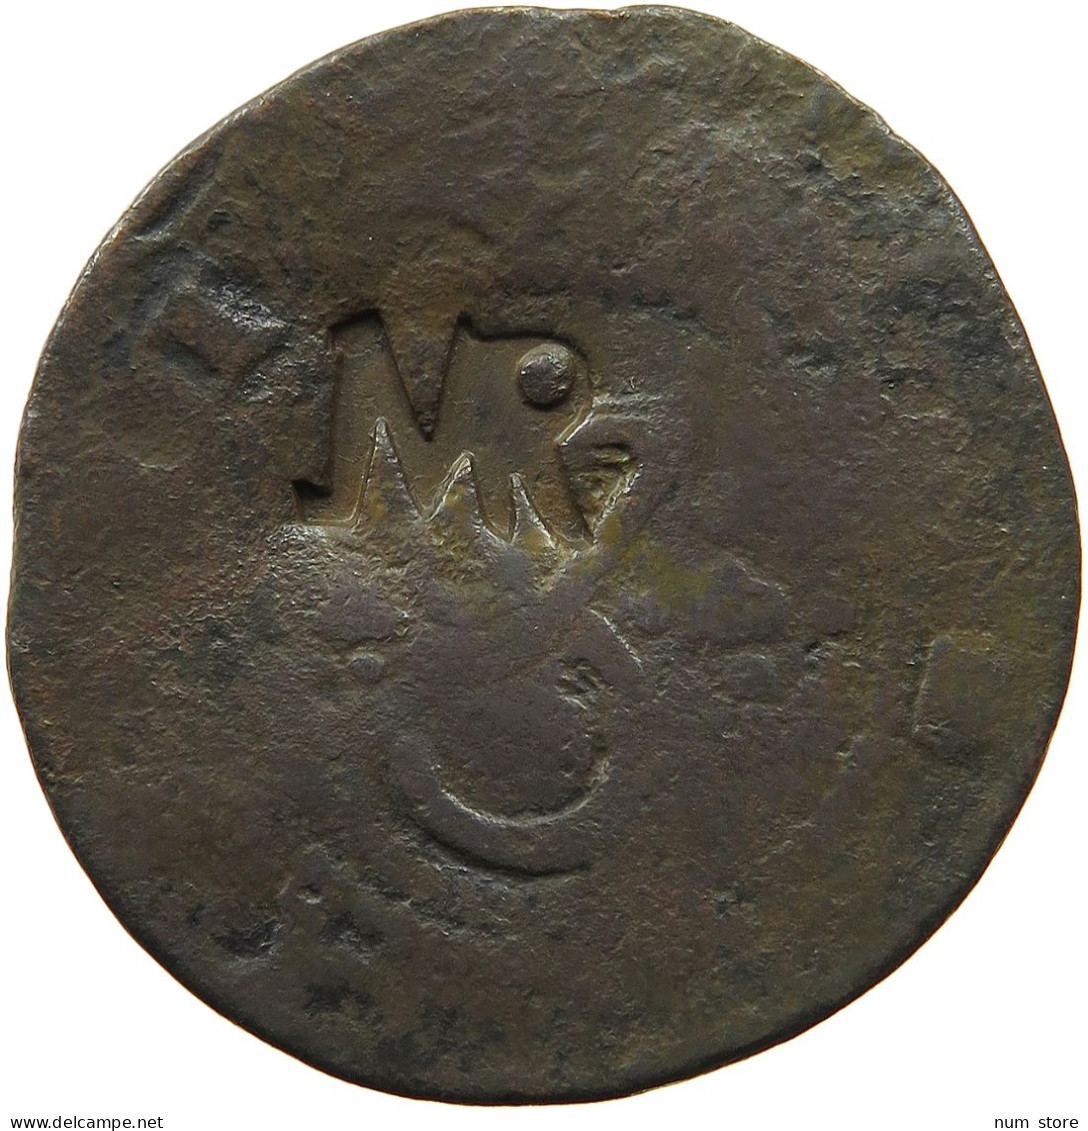 MOZAMBIQUE REIS  MOZAMBIQUE COPPER REIS COUNTERMARKED MR VERY RARE #t059 0385 - Mosambik